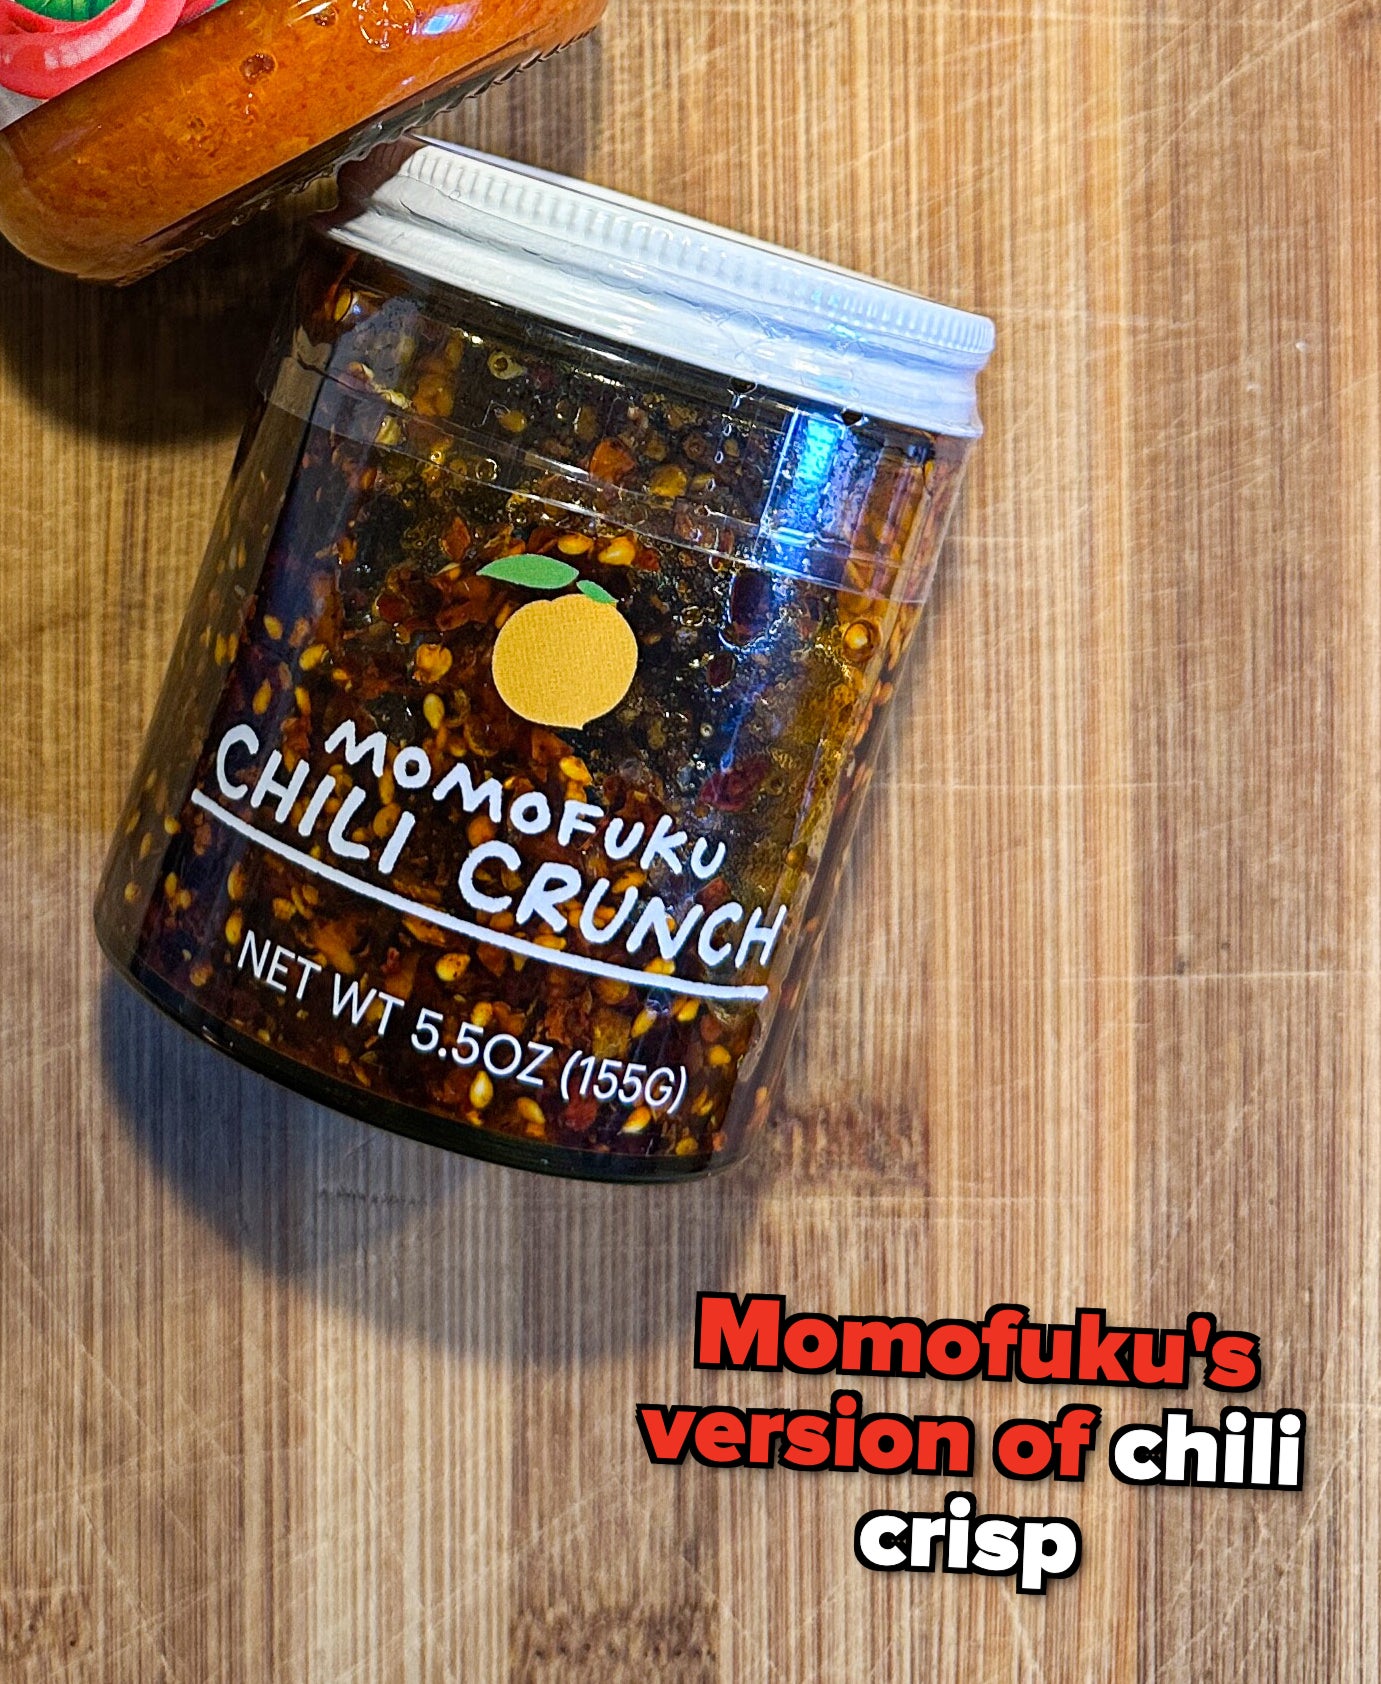 Chili crunch sauce on a wooden surface